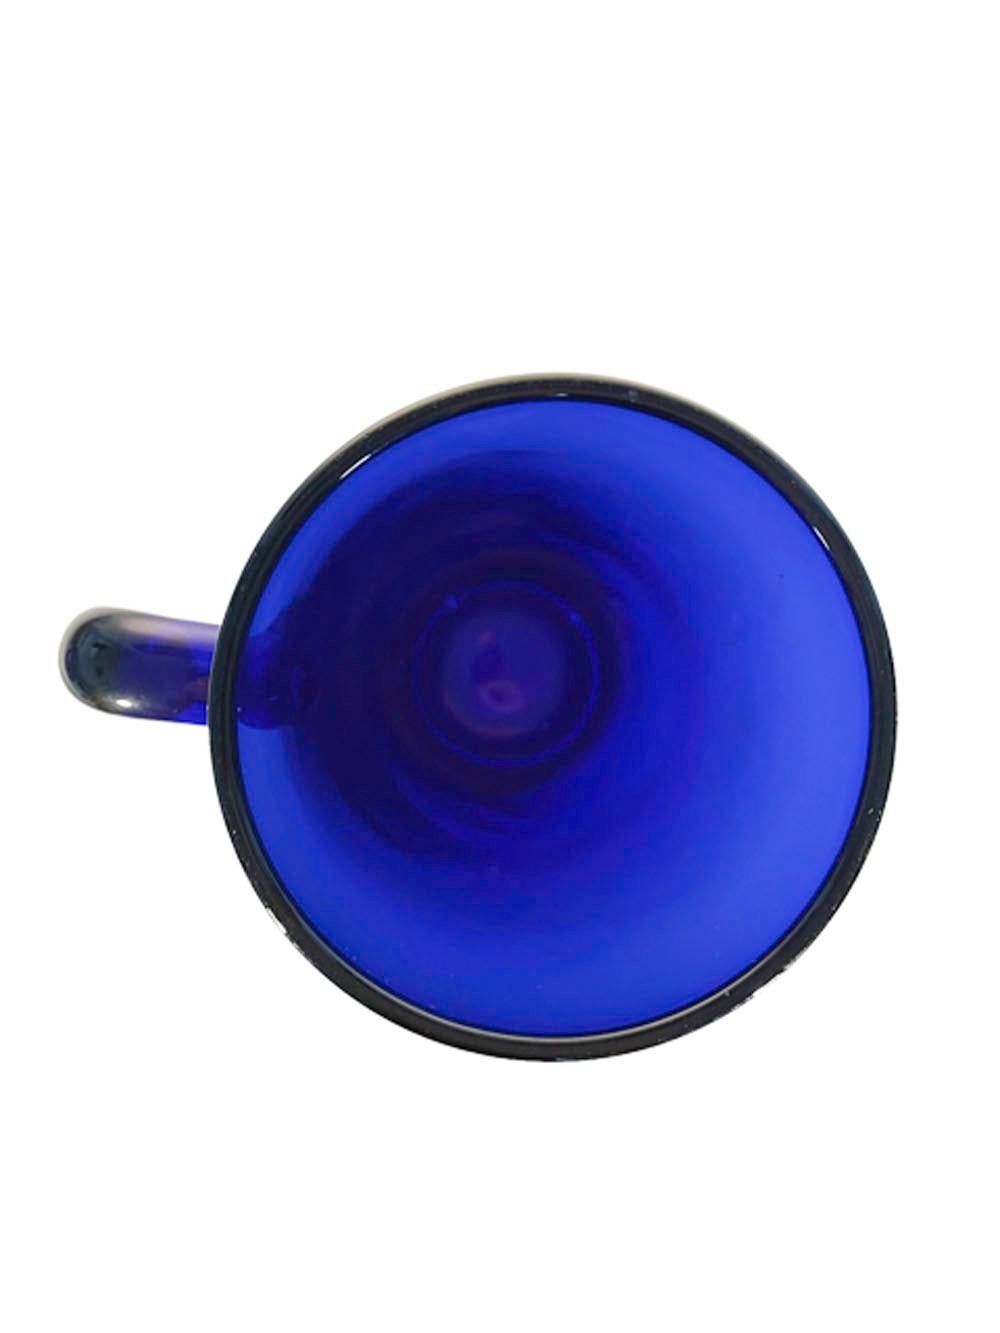 Unusual Art Deco Cobalt Blue Glass Cocktail Shaker with Applied Glass Handle For Sale 1